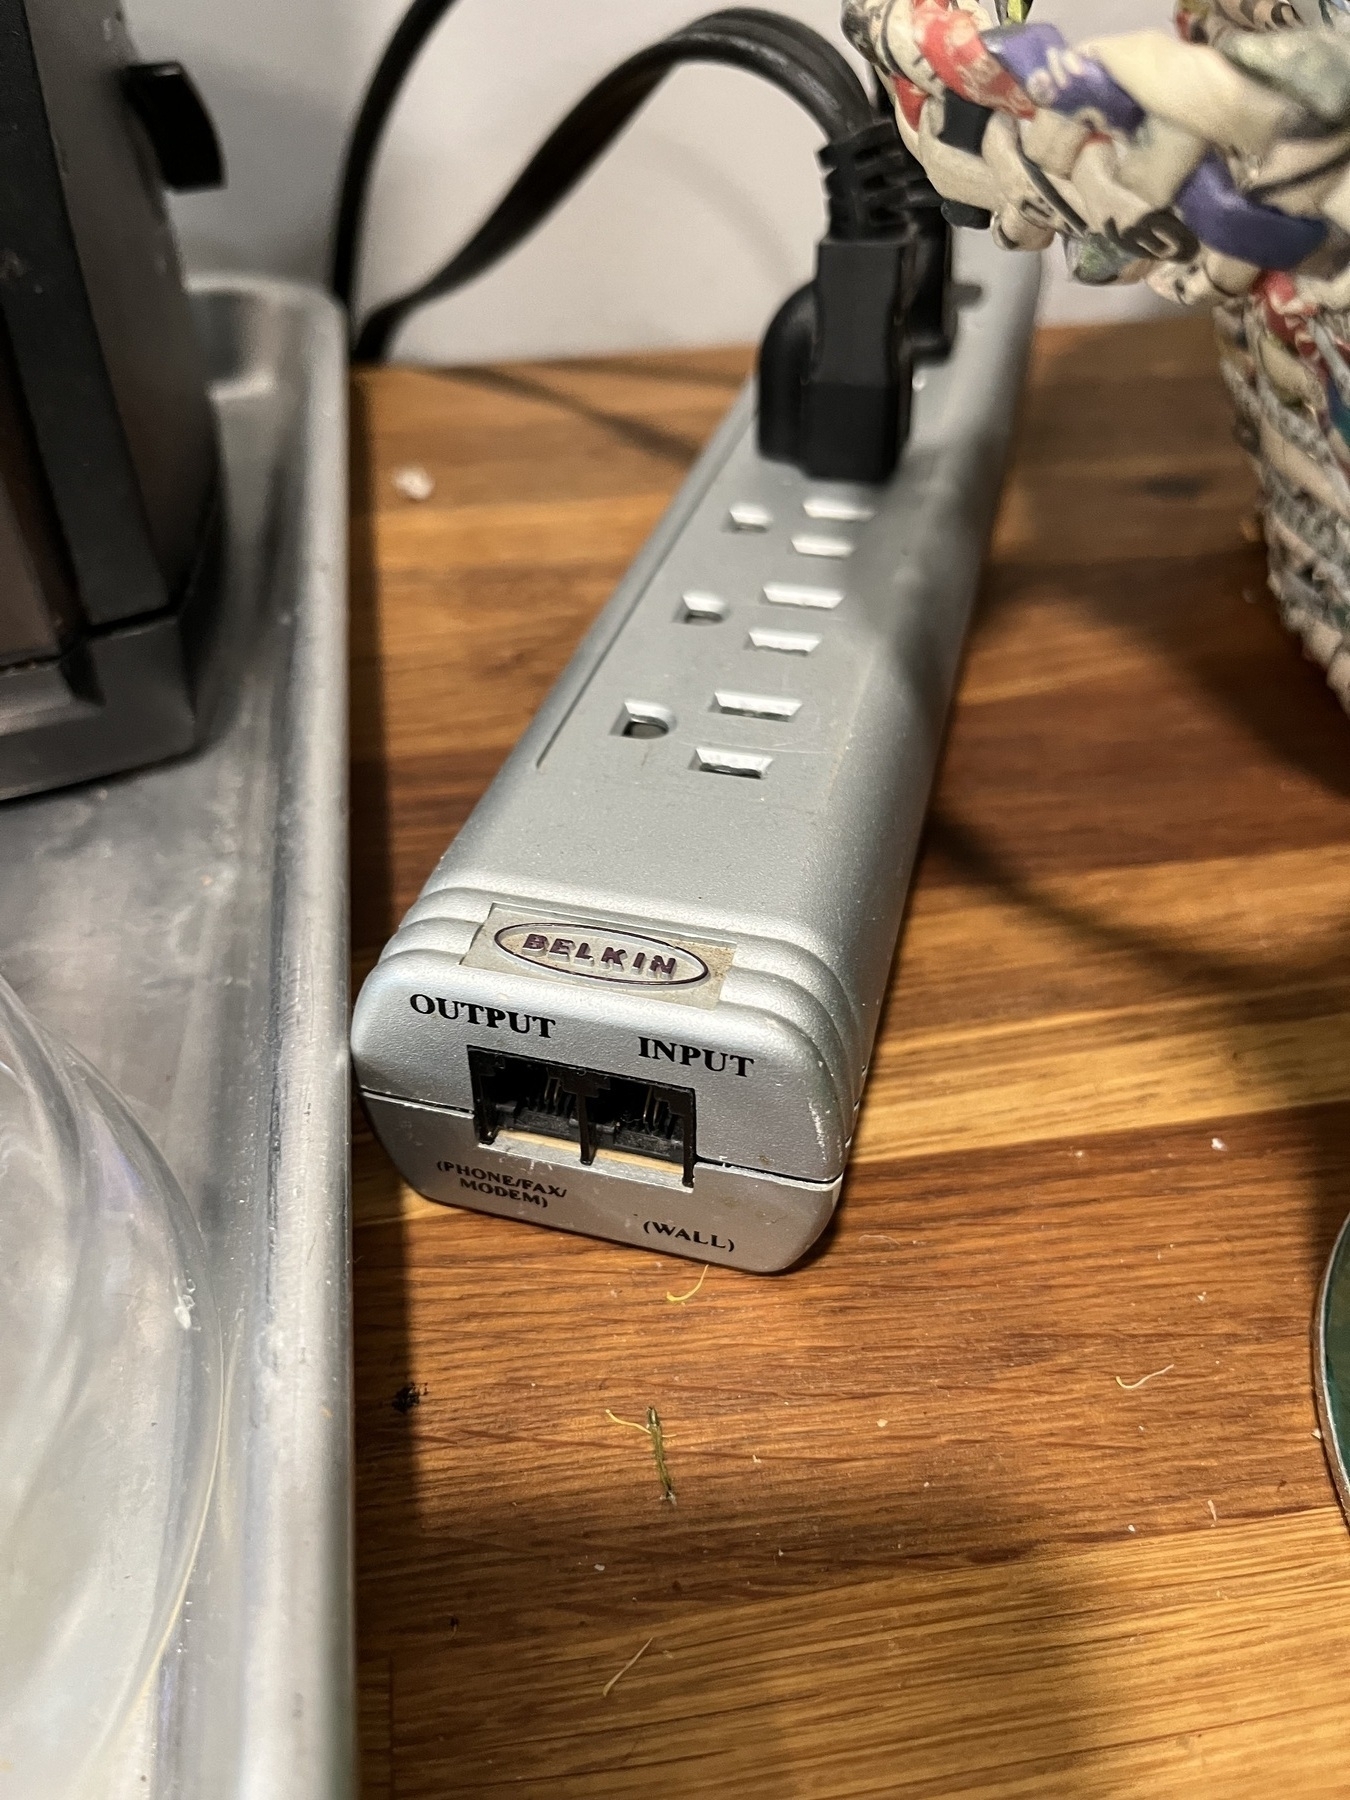 A grey Belkin-branded power strip with two slots for phone cables. One labeled Output (Phone/Fax/Modem) and one labeled Input (Wall).